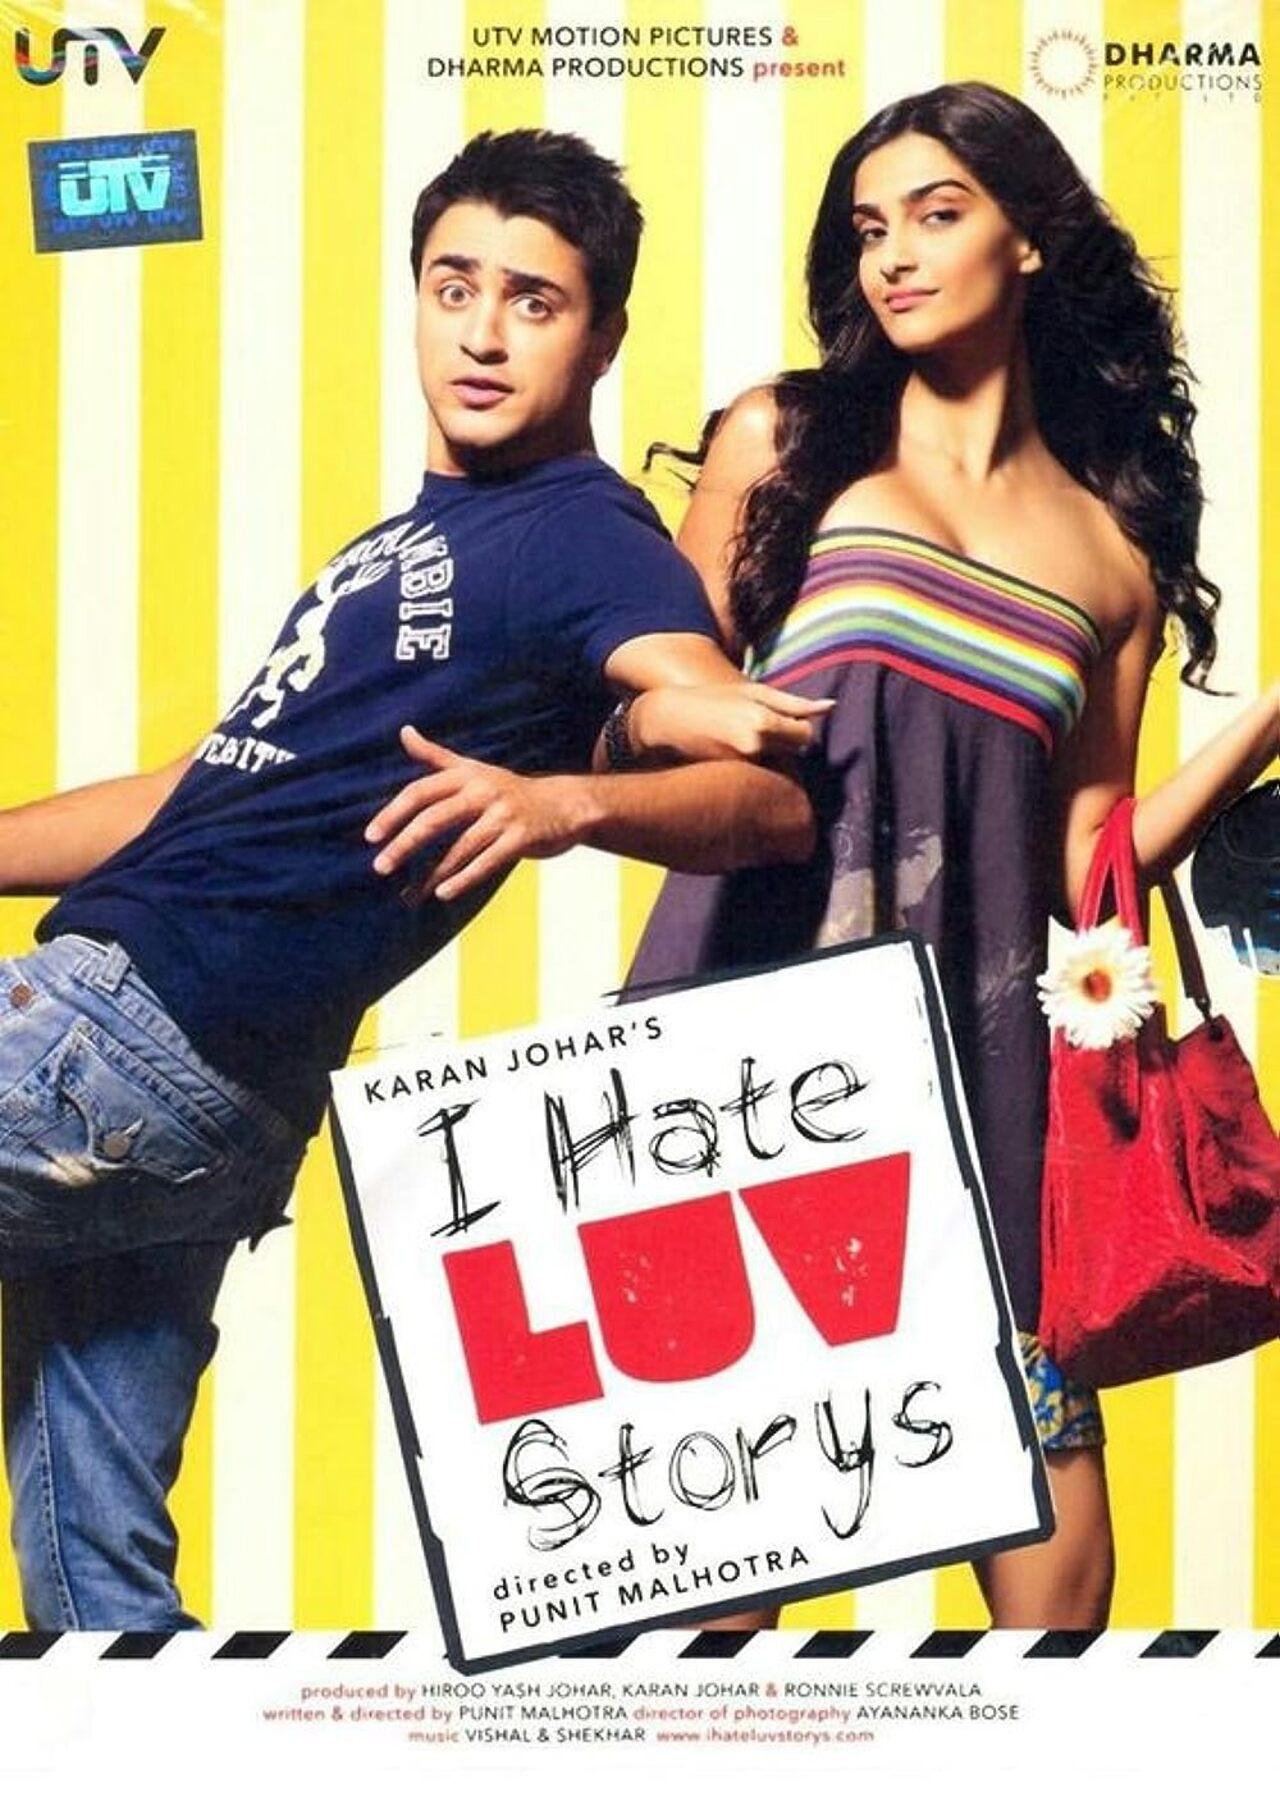 I Hate Luv Storys (2010)
Though Jay (Imran Khan) hates everything about love, Simran (Sonam Kapoor) is an extremely romantic woman. While she falls in love with Jay and makes it evident, he struggles with his feelings and is hesitant to convey them